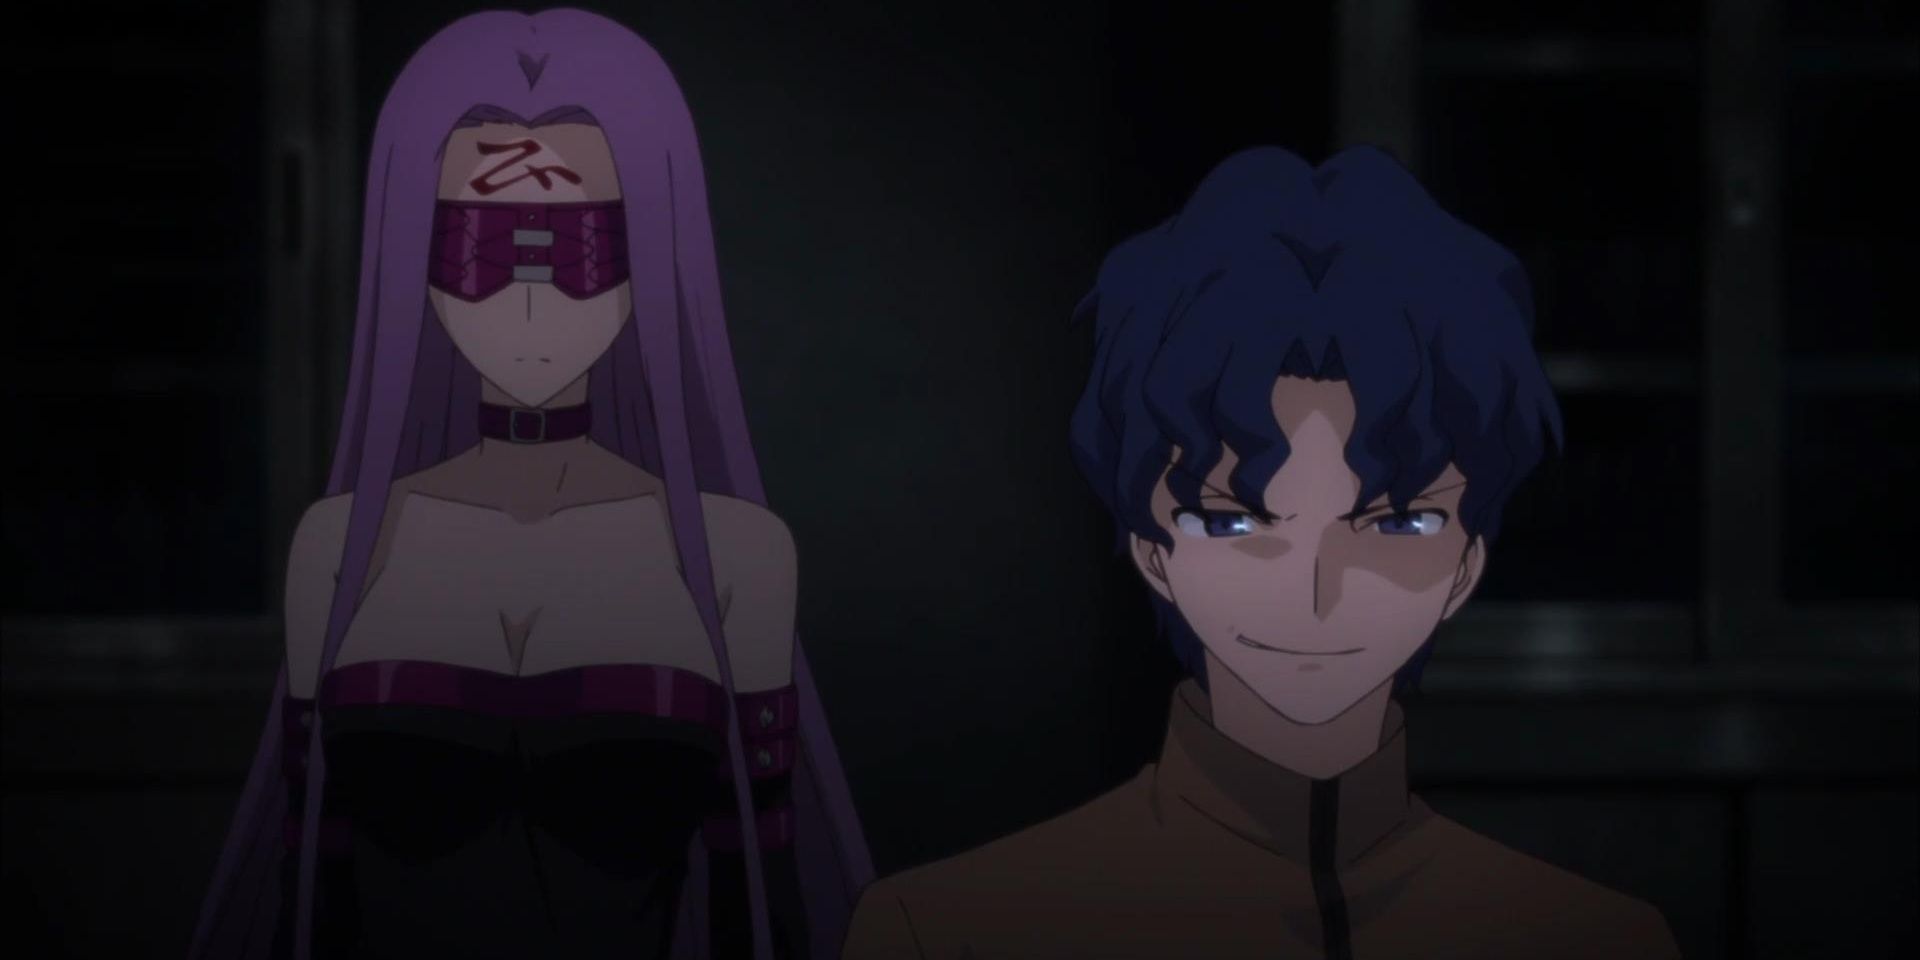 Rider And Her Master From Fate/Stay Night